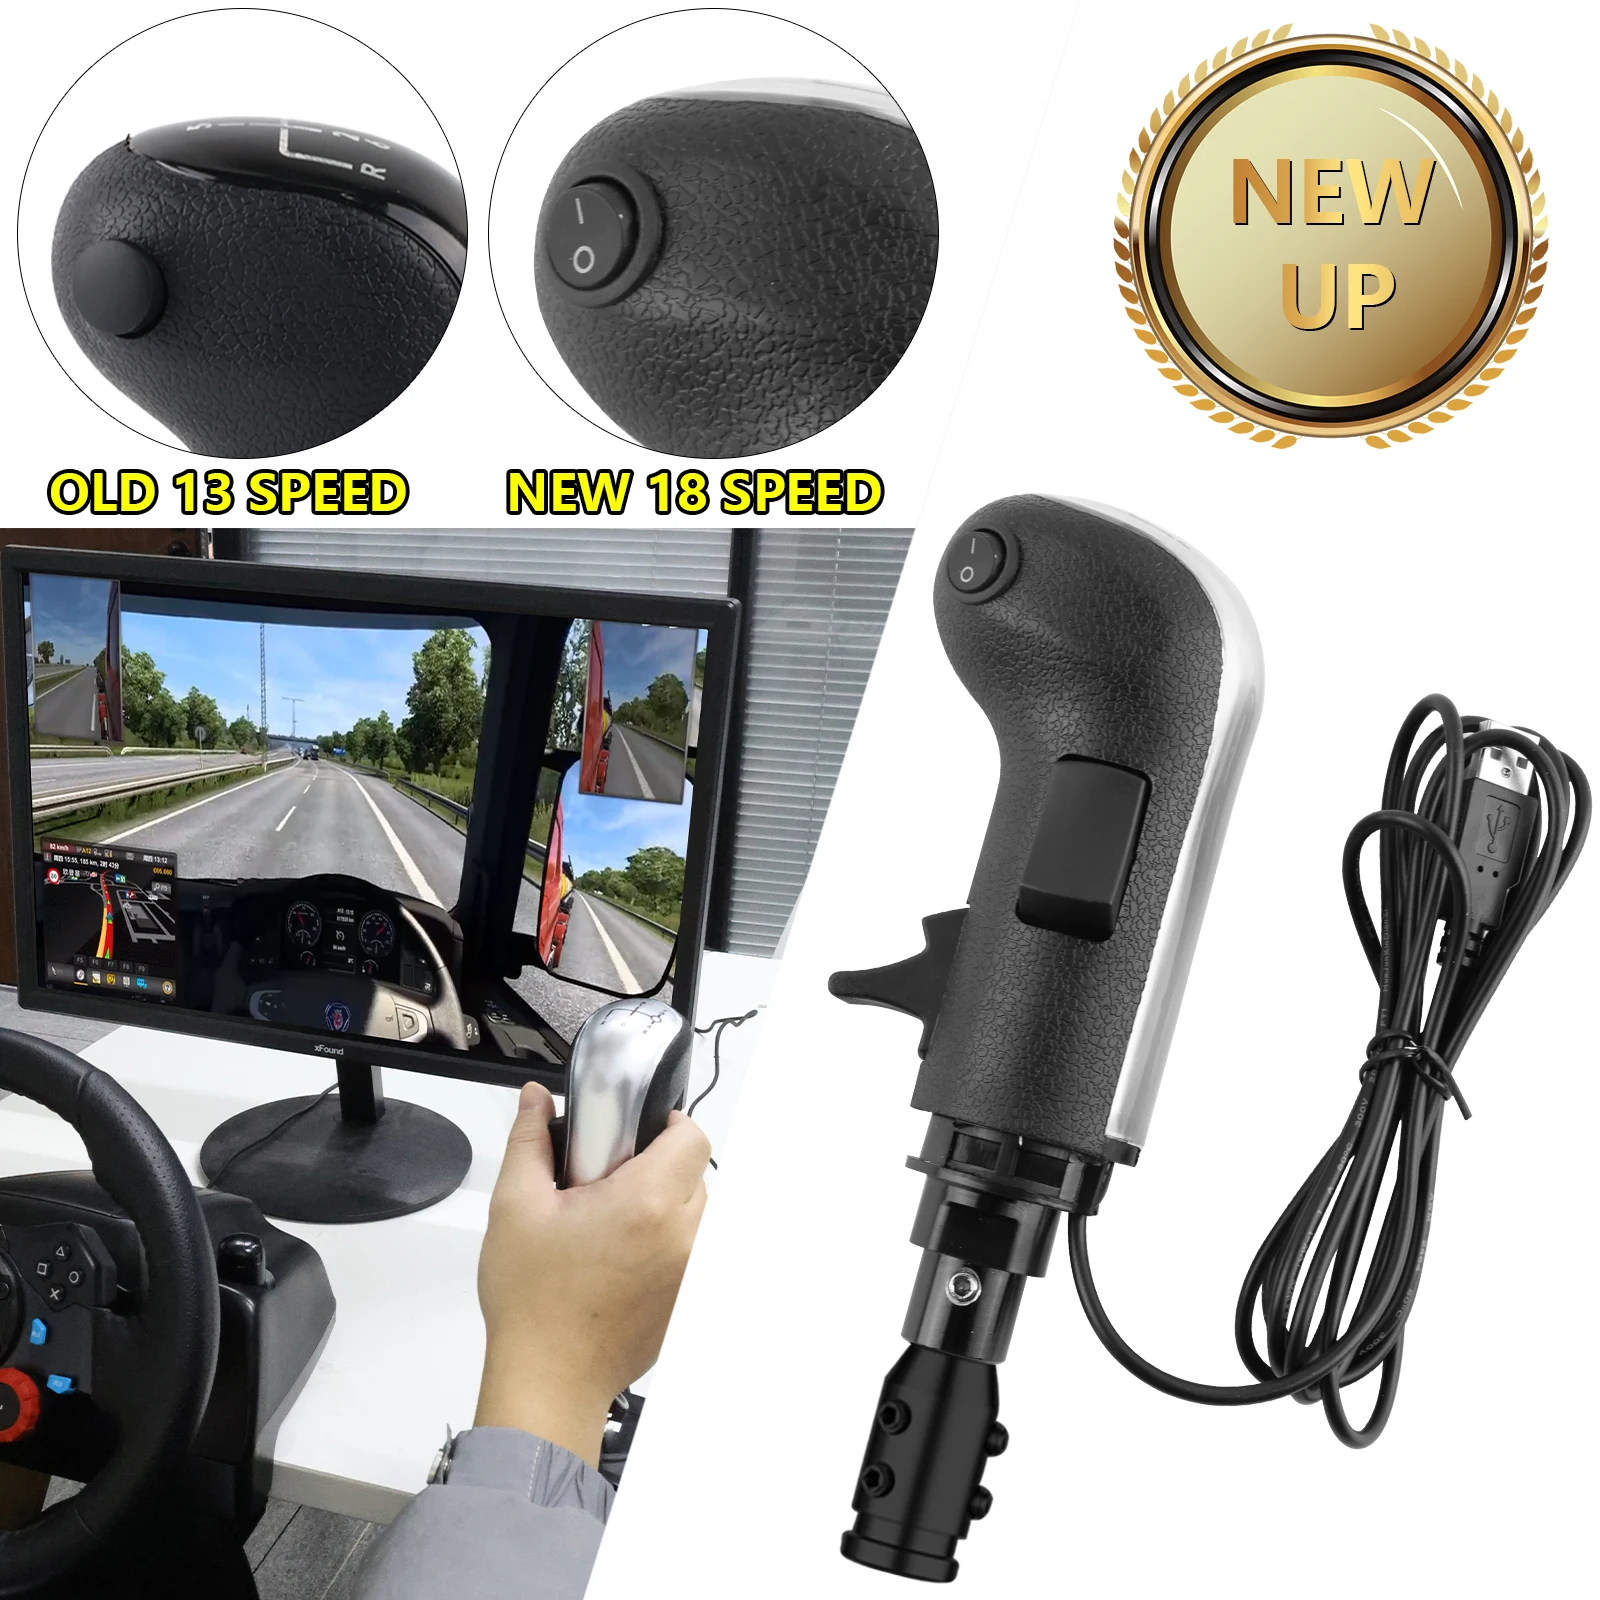 EST2 shifter knob USB Game 18 Gear Shifter Knob 3 Switch Replacement SKRS for Logitech G923 G29 G27 G25 TH8A